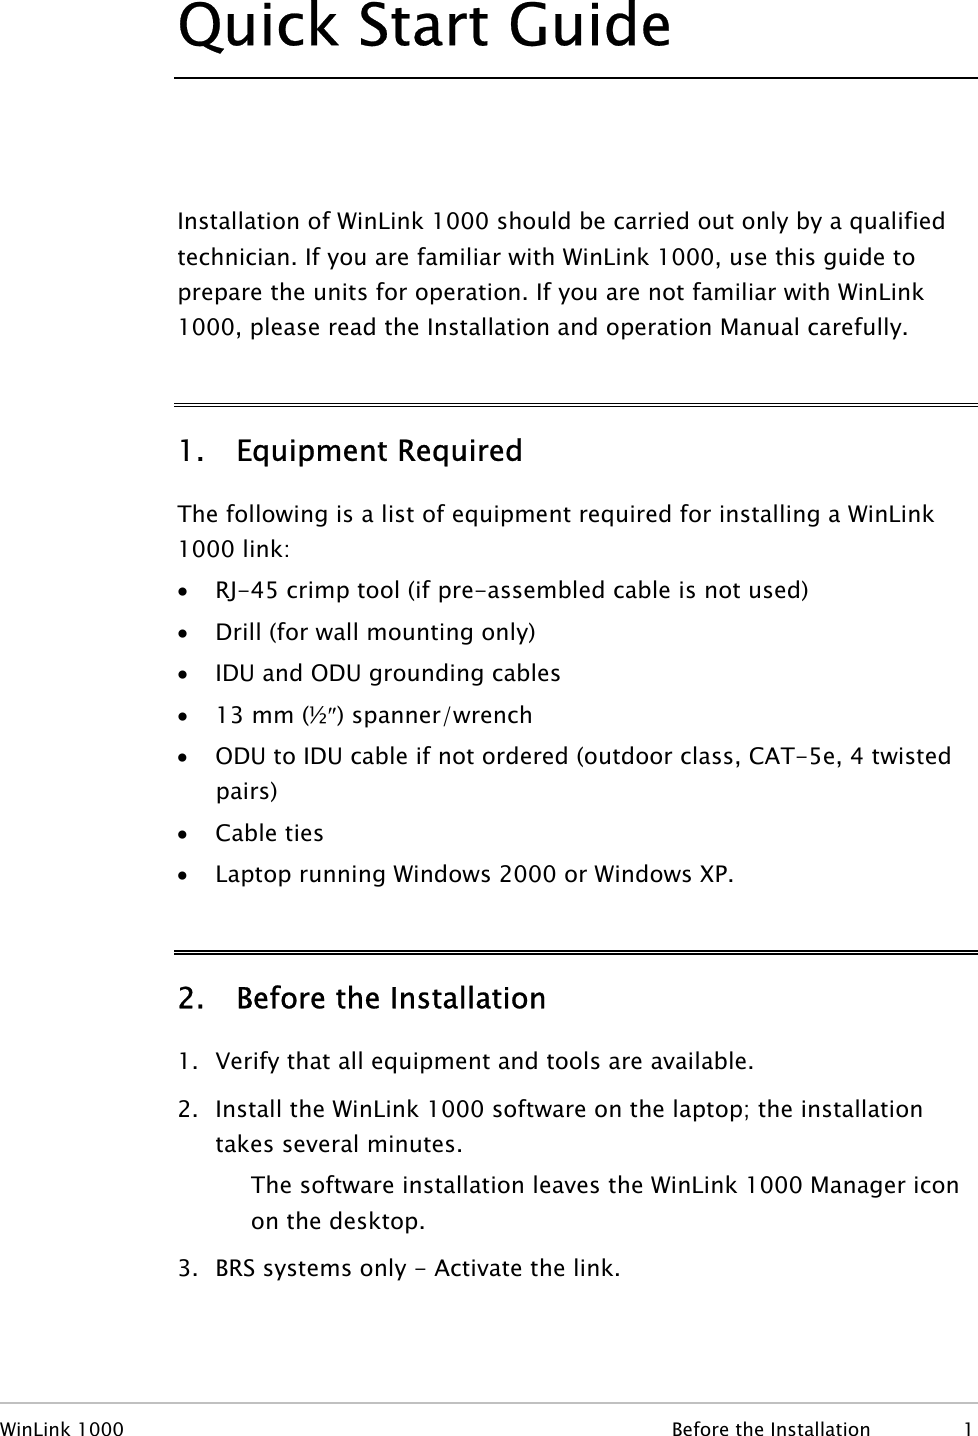 Quick Start Guide  Installation of WinLink 1000 should be carried out only by a qualified technician. If you are familiar with WinLink 1000, use this guide to prepare the units for operation. If you are not familiar with WinLink 1000, please read the Installation and operation Manual carefully. 1. Equipment Required The following is a list of equipment required for installing a WinLink 1000 link: • RJ-45 crimp tool (if pre-assembled cable is not used) • Drill (for wall mounting only) • IDU and ODU grounding cables • 13 mm (½″) spanner/wrench • ODU to IDU cable if not ordered (outdoor class, CAT-5e, 4 twisted pairs) • Cable ties • Laptop running Windows 2000 or Windows XP. 2. Before the Installation 1. Verify that all equipment and tools are available. 2. Install the WinLink 1000 software on the laptop; the installation takes several minutes. The software installation leaves the WinLink 1000 Manager icon on the desktop. 3. BRS systems only - Activate the link. WinLink 1000  Before the Installation  1 